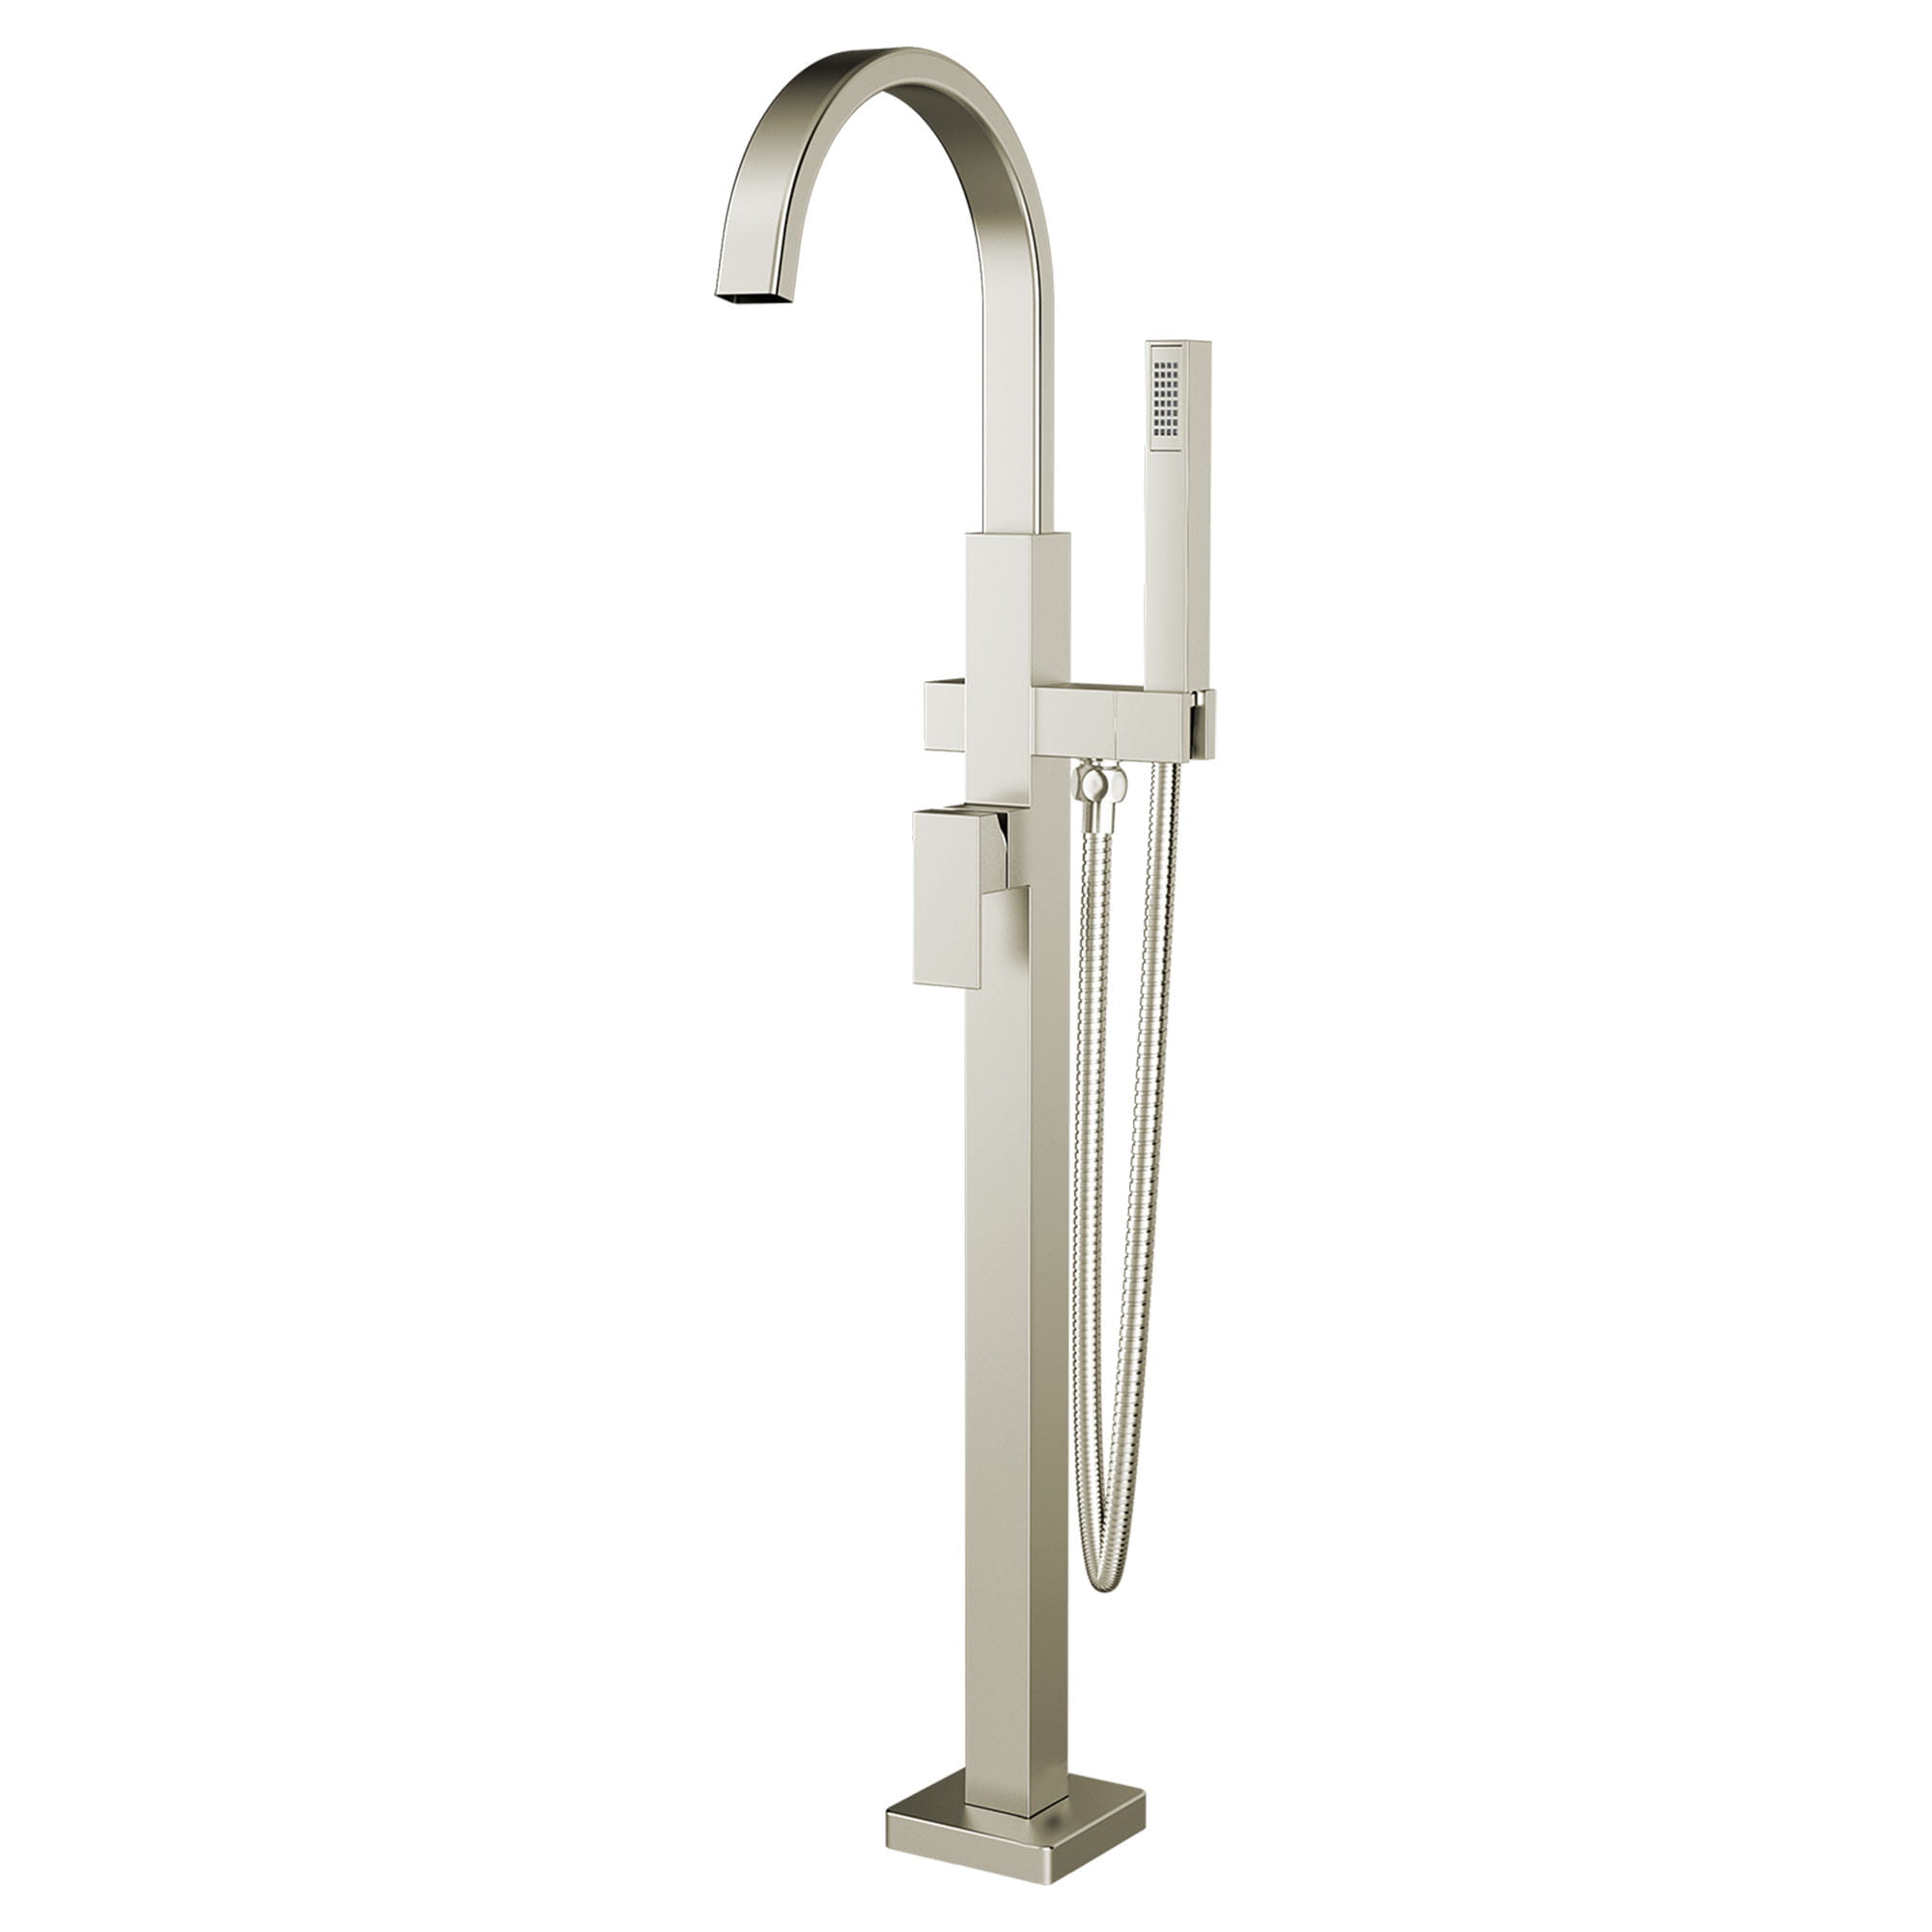 Times Square Contemporary Square Freestanding Tub Faucet with Personal Shower for Flash Rough in Valve with Lever Handle   BRUSHED NICKEL